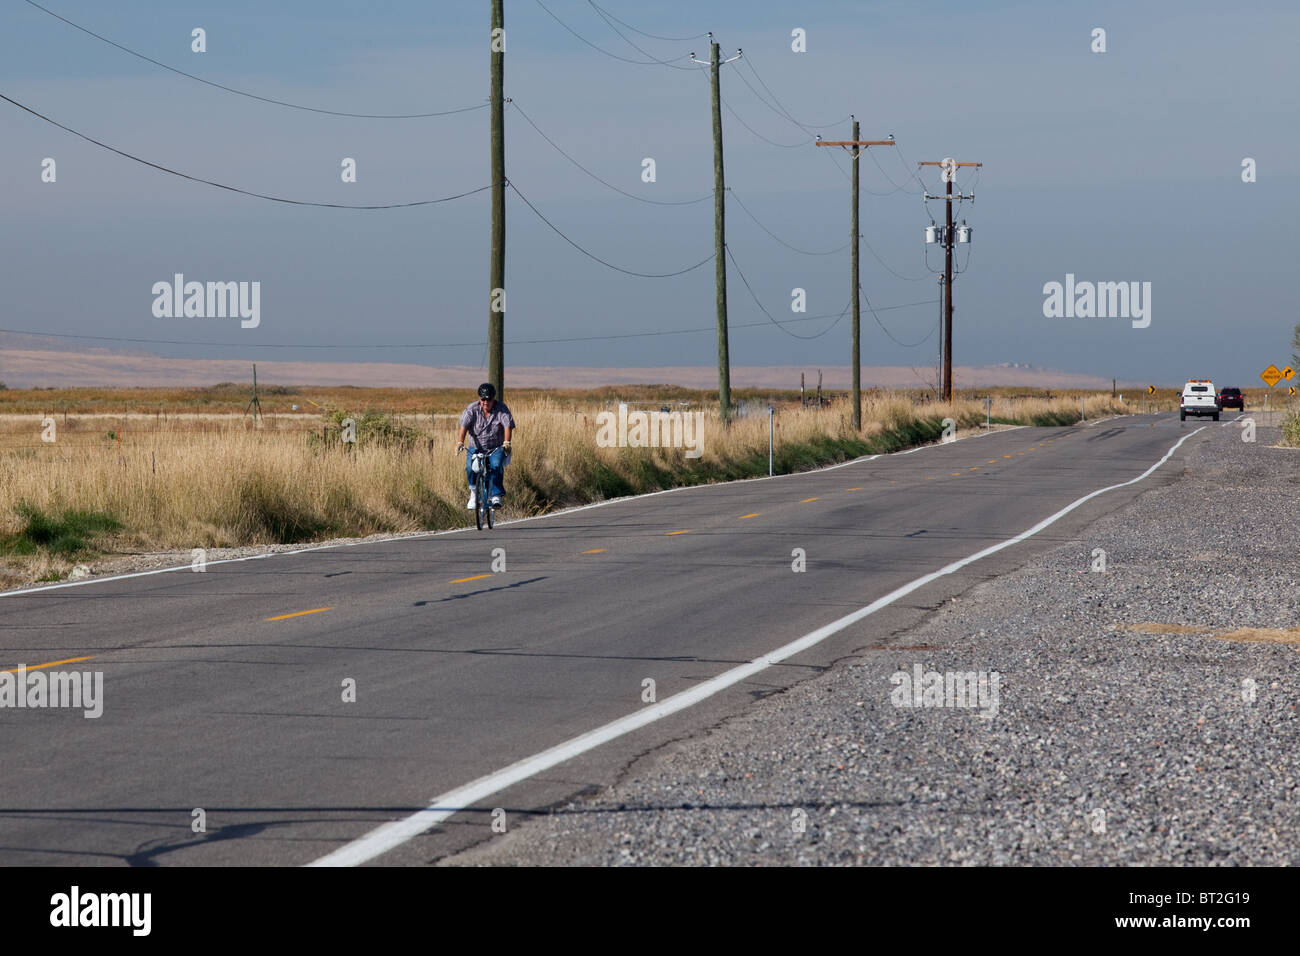 Older man riding a bicycle on a country road, in rural Utah Stock Photo